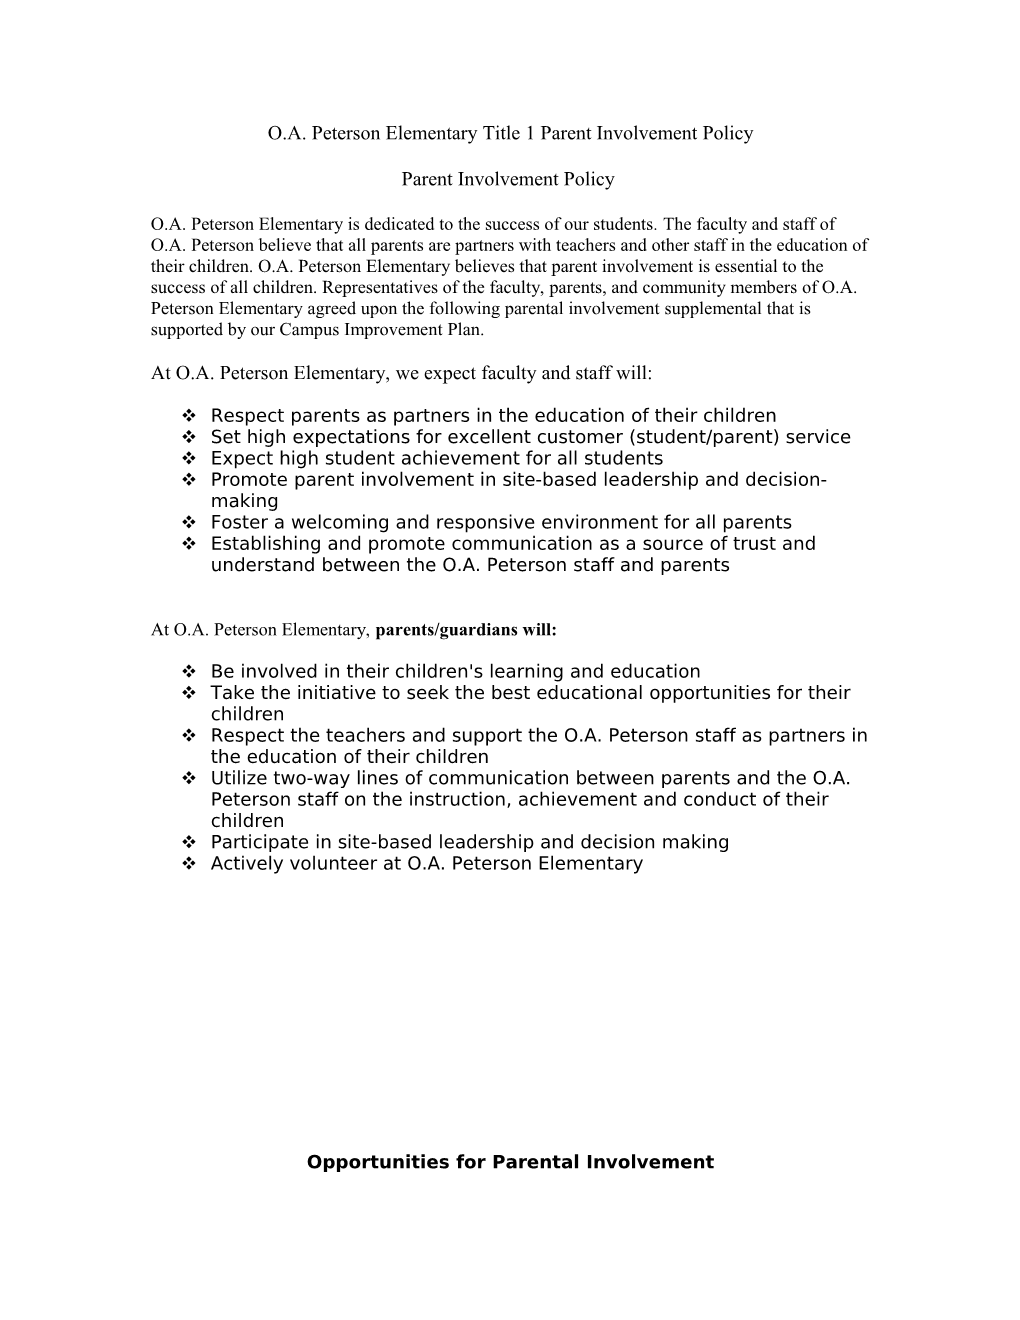 O.A. Peterson Elementary Title 1 Parent Involvement Policy